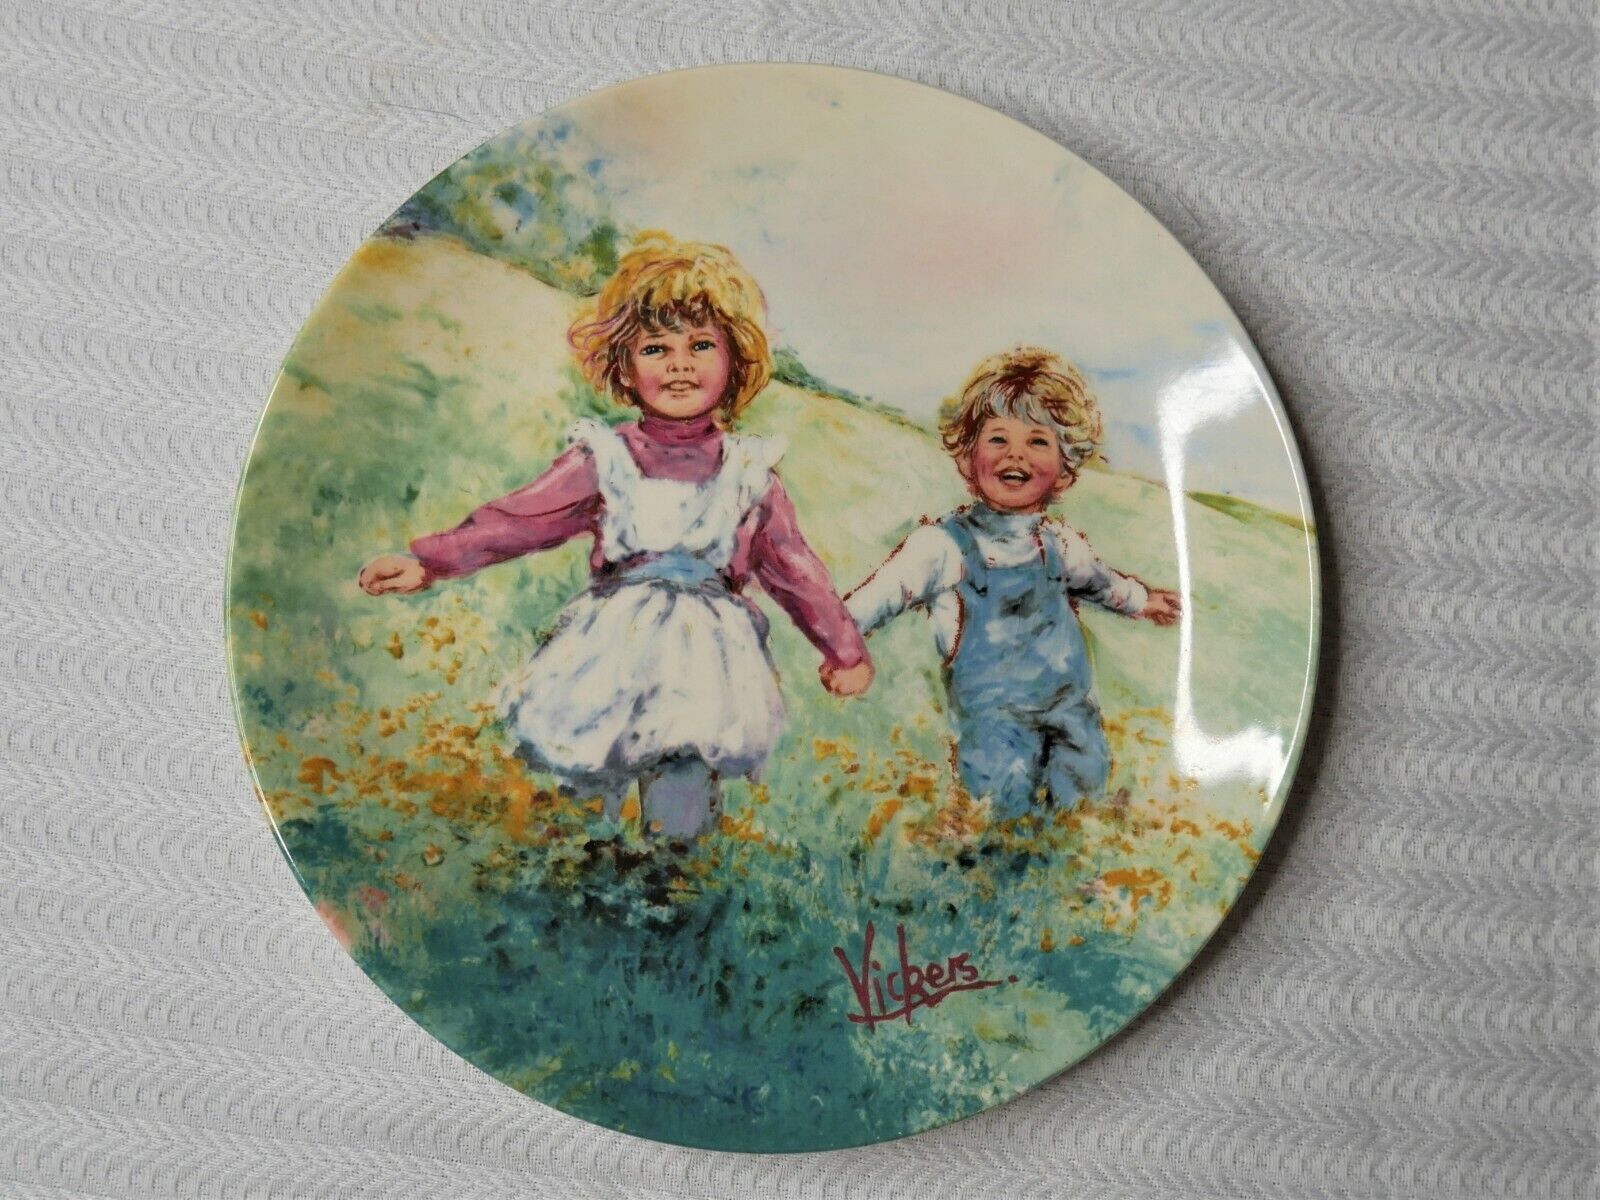 Playtime Mary Vickers 8 inch Plate Wedgwood Queens Ware Limited Edition #2637H - $29.99